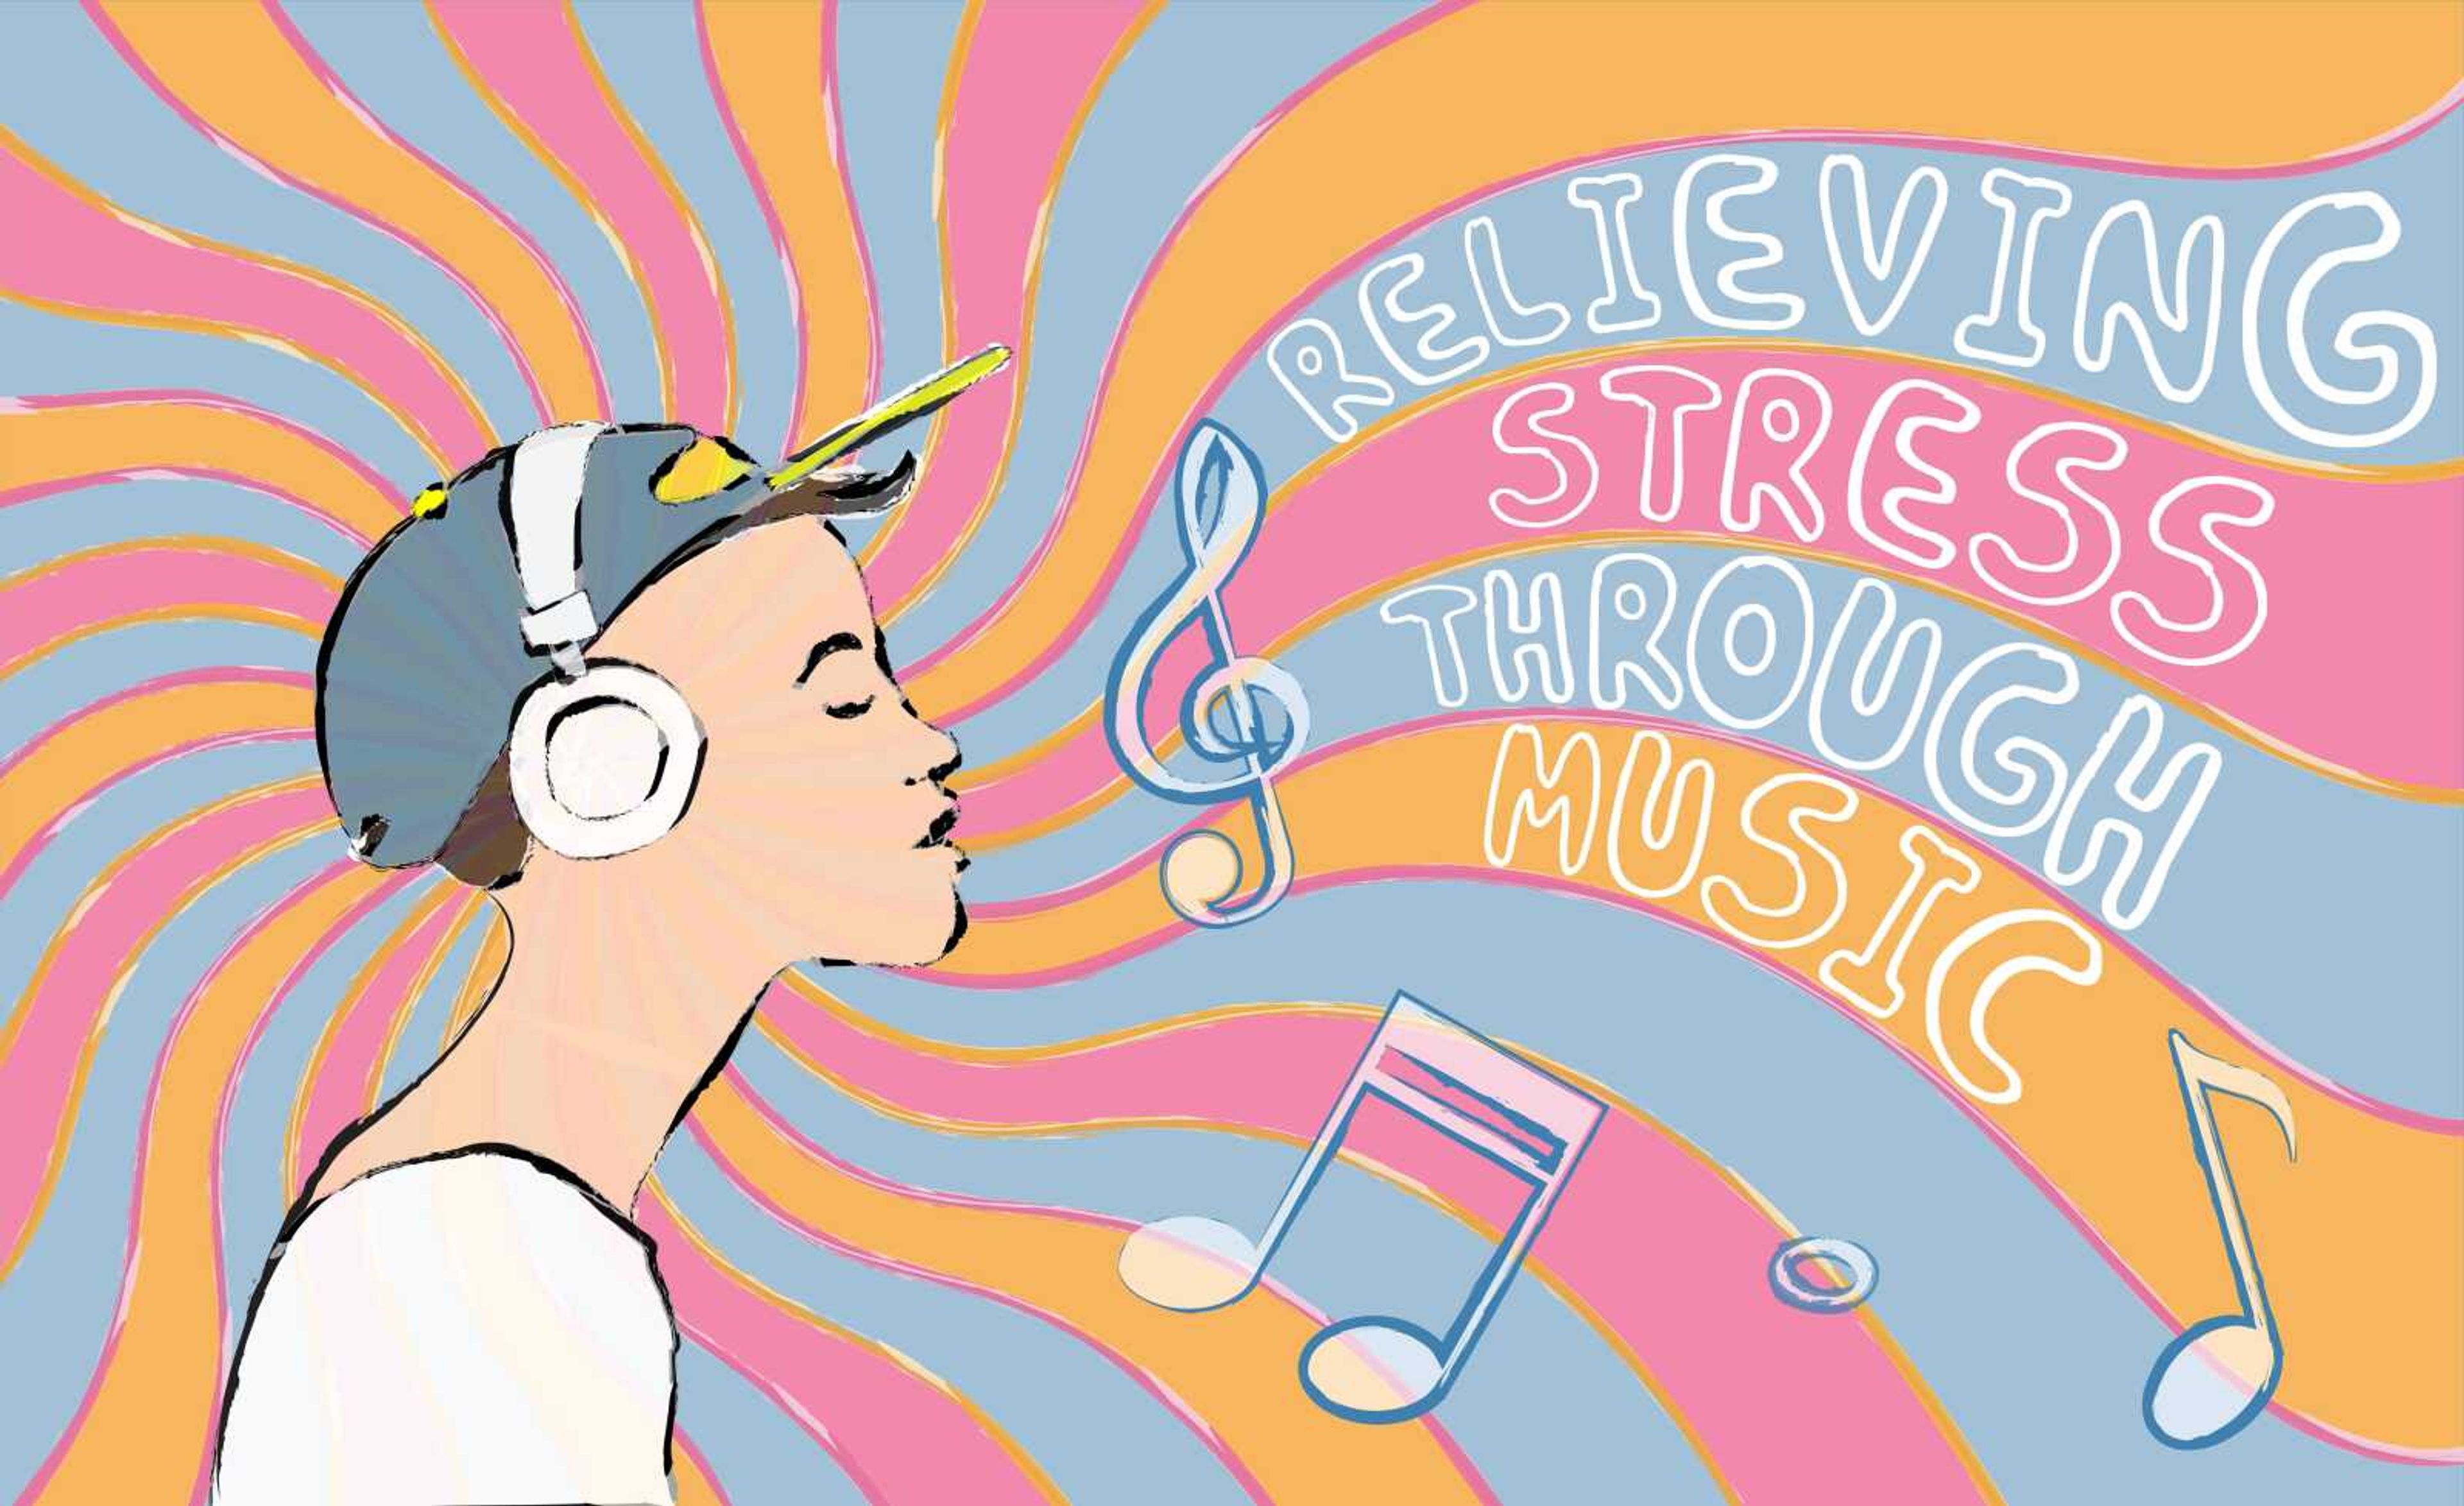 Americans turn to music to de-stress